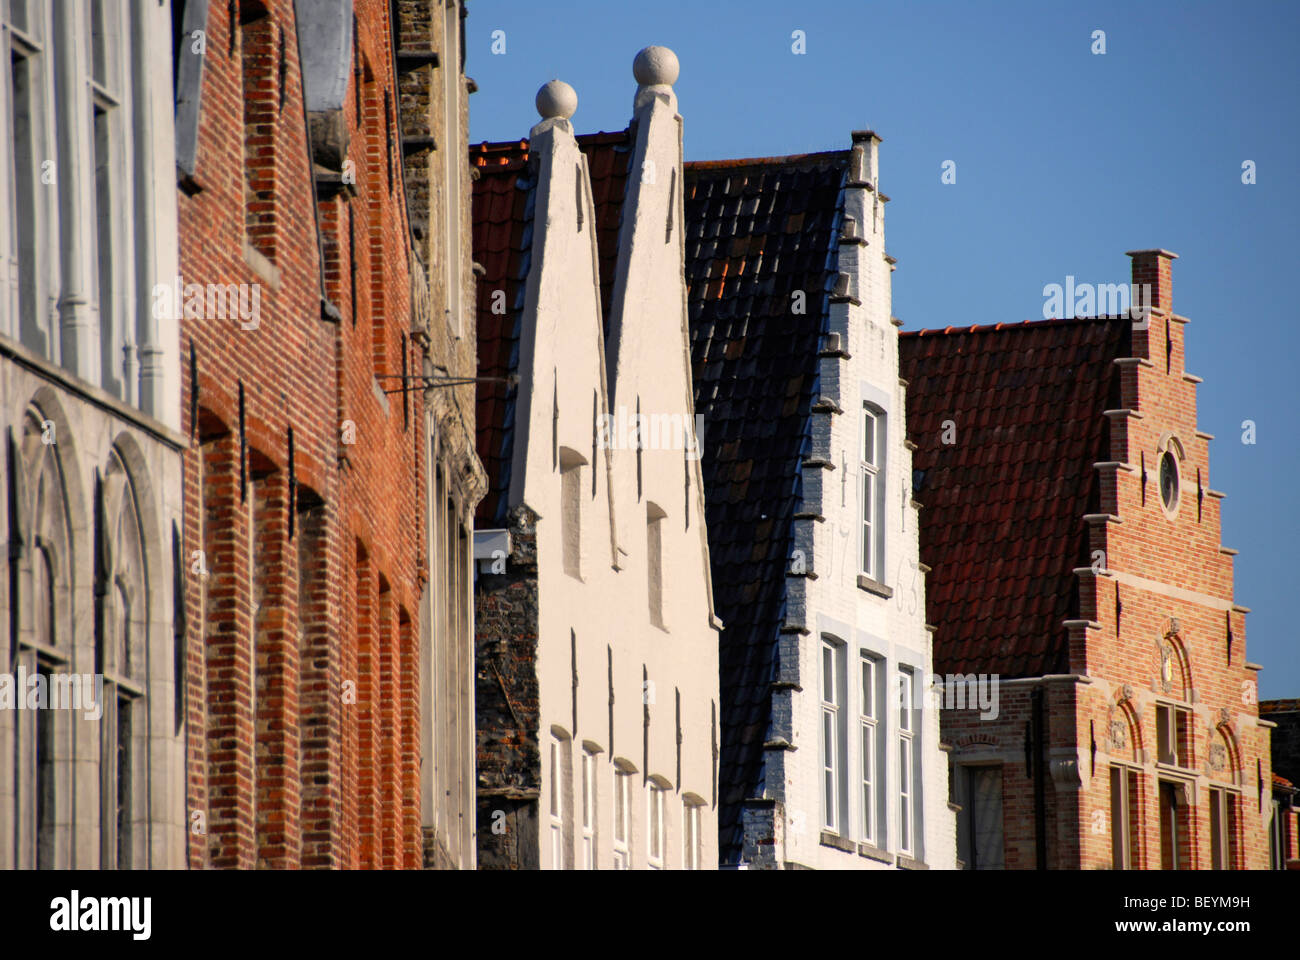 Gabled roofs and facades of buildings Bruges Brugge Belgium Stock Photo